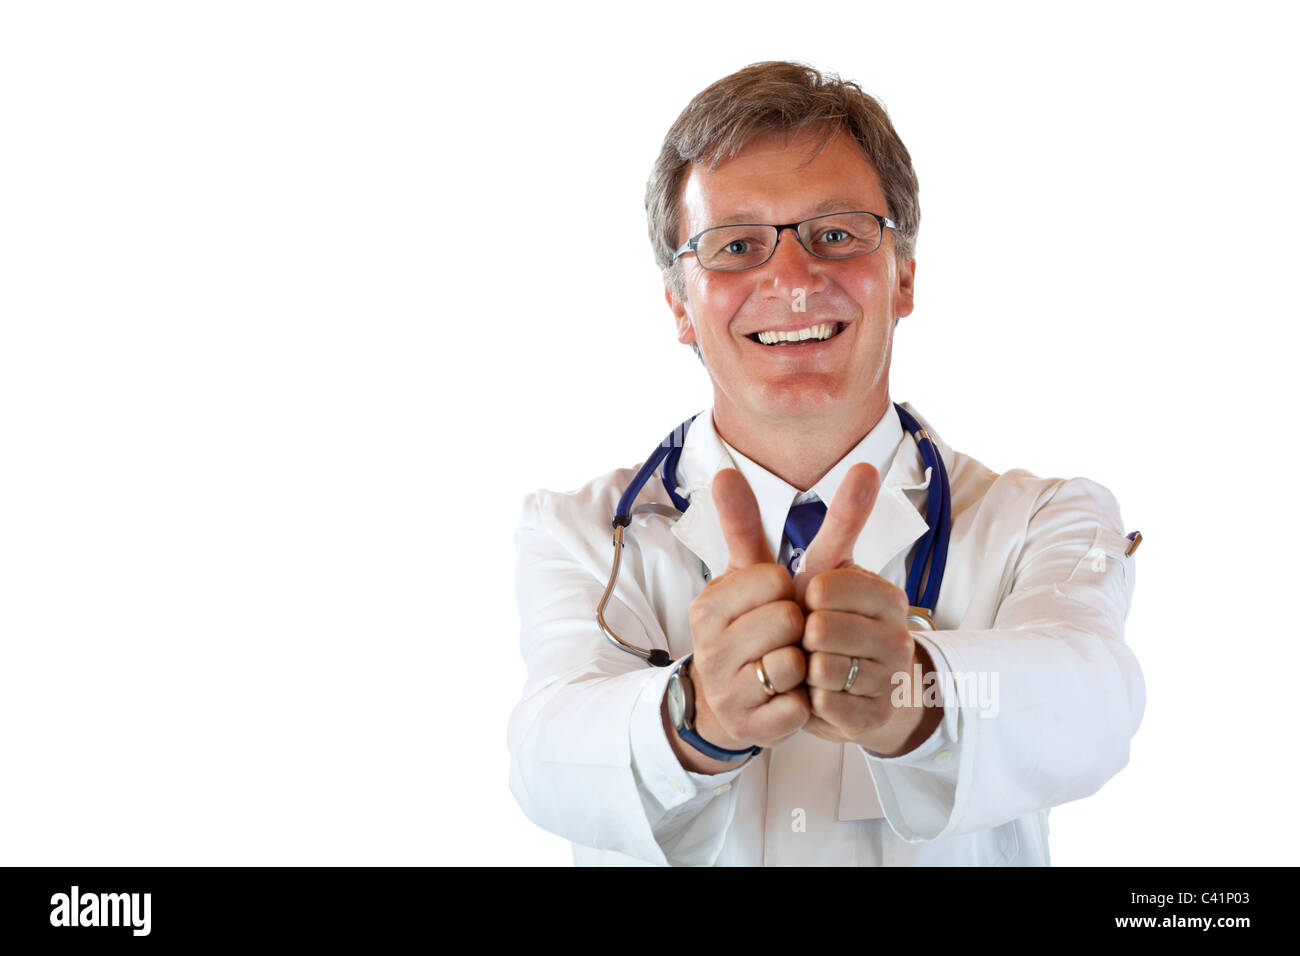 Happy smiling male medical doctor shows both thumbs up. Isolated on white background. Stock Photo